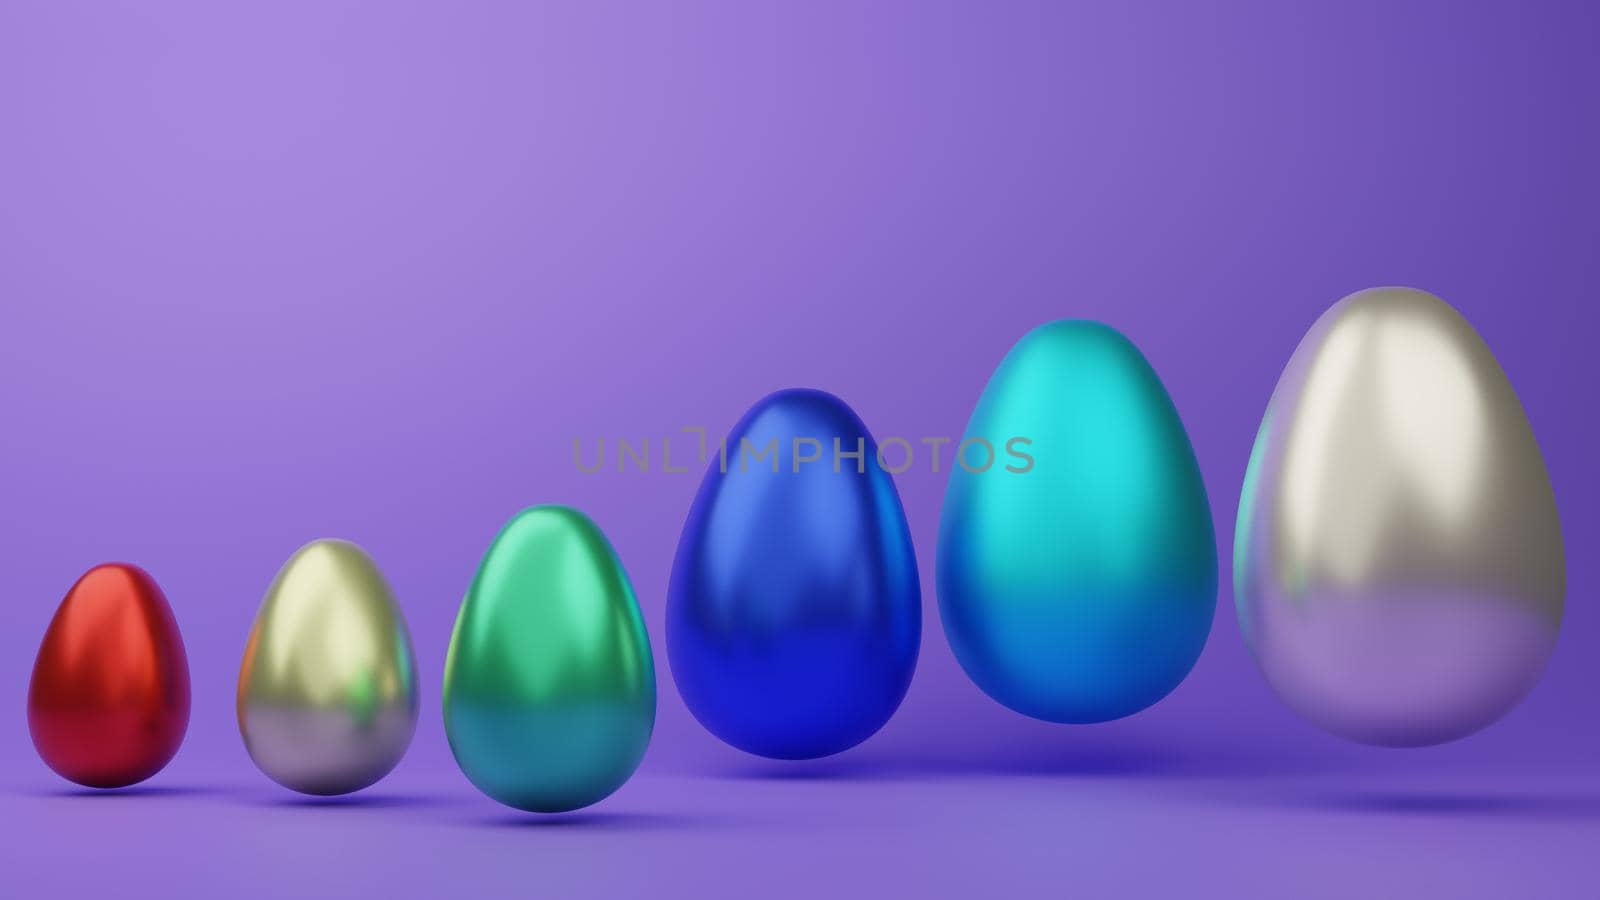 Abstract elegant colorful Easter eggs isolated on white during the festive season of Easter 3d rendering.